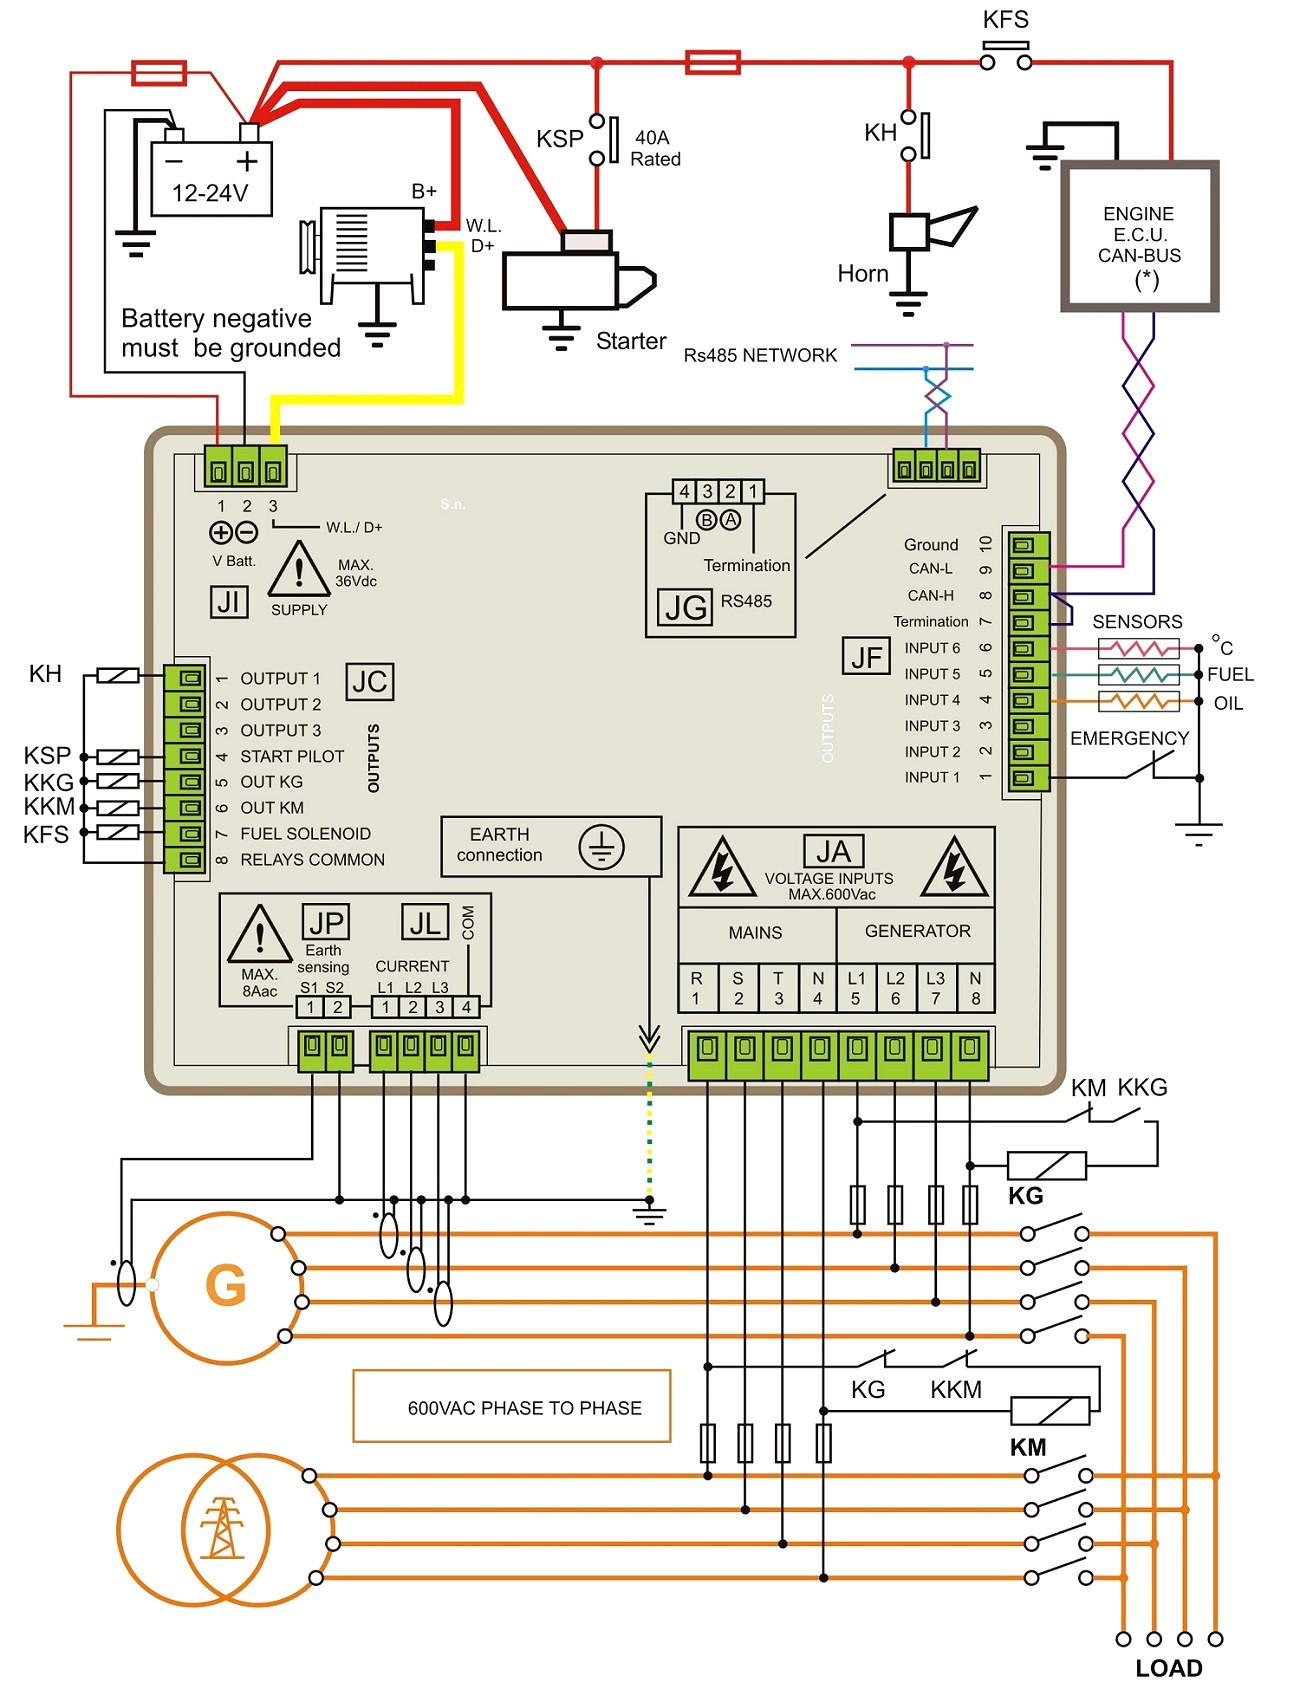 How To Wire A Manual Transfer Switch Diagram Fresh Generac Manual Transfer Switch Wiring Diagram Sources